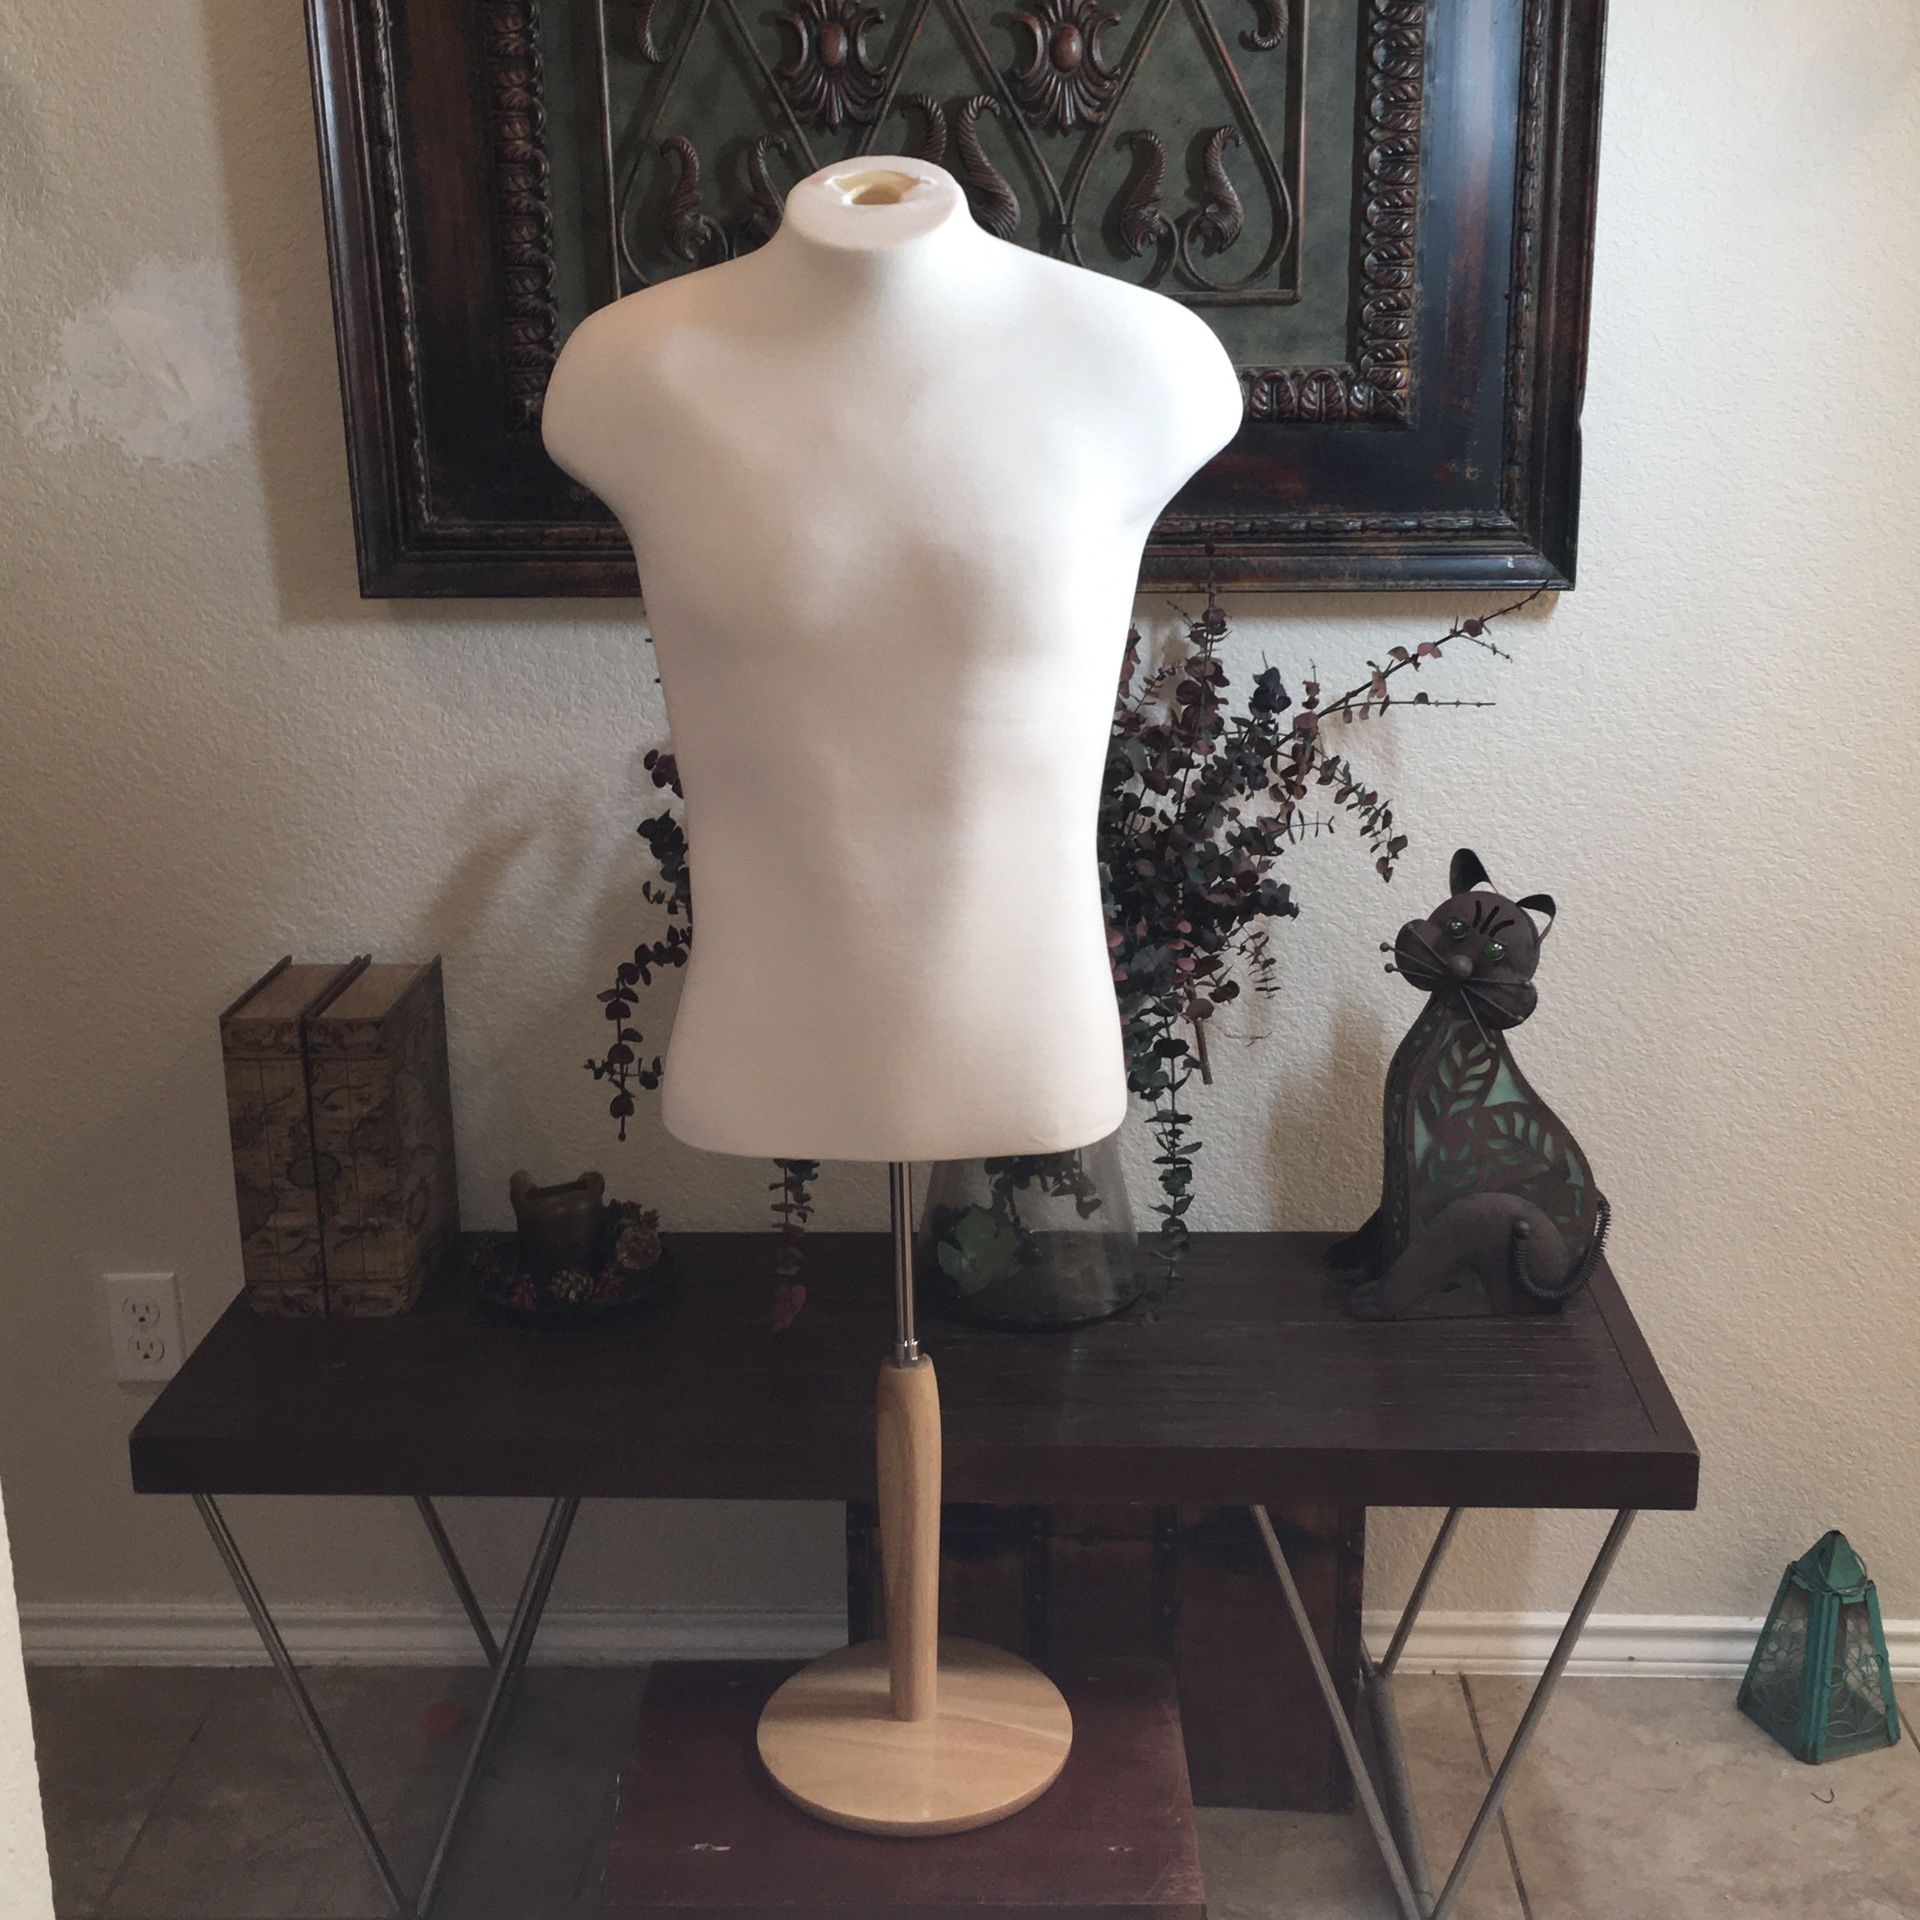 Male form mannequin on adjustable WOODEN stand